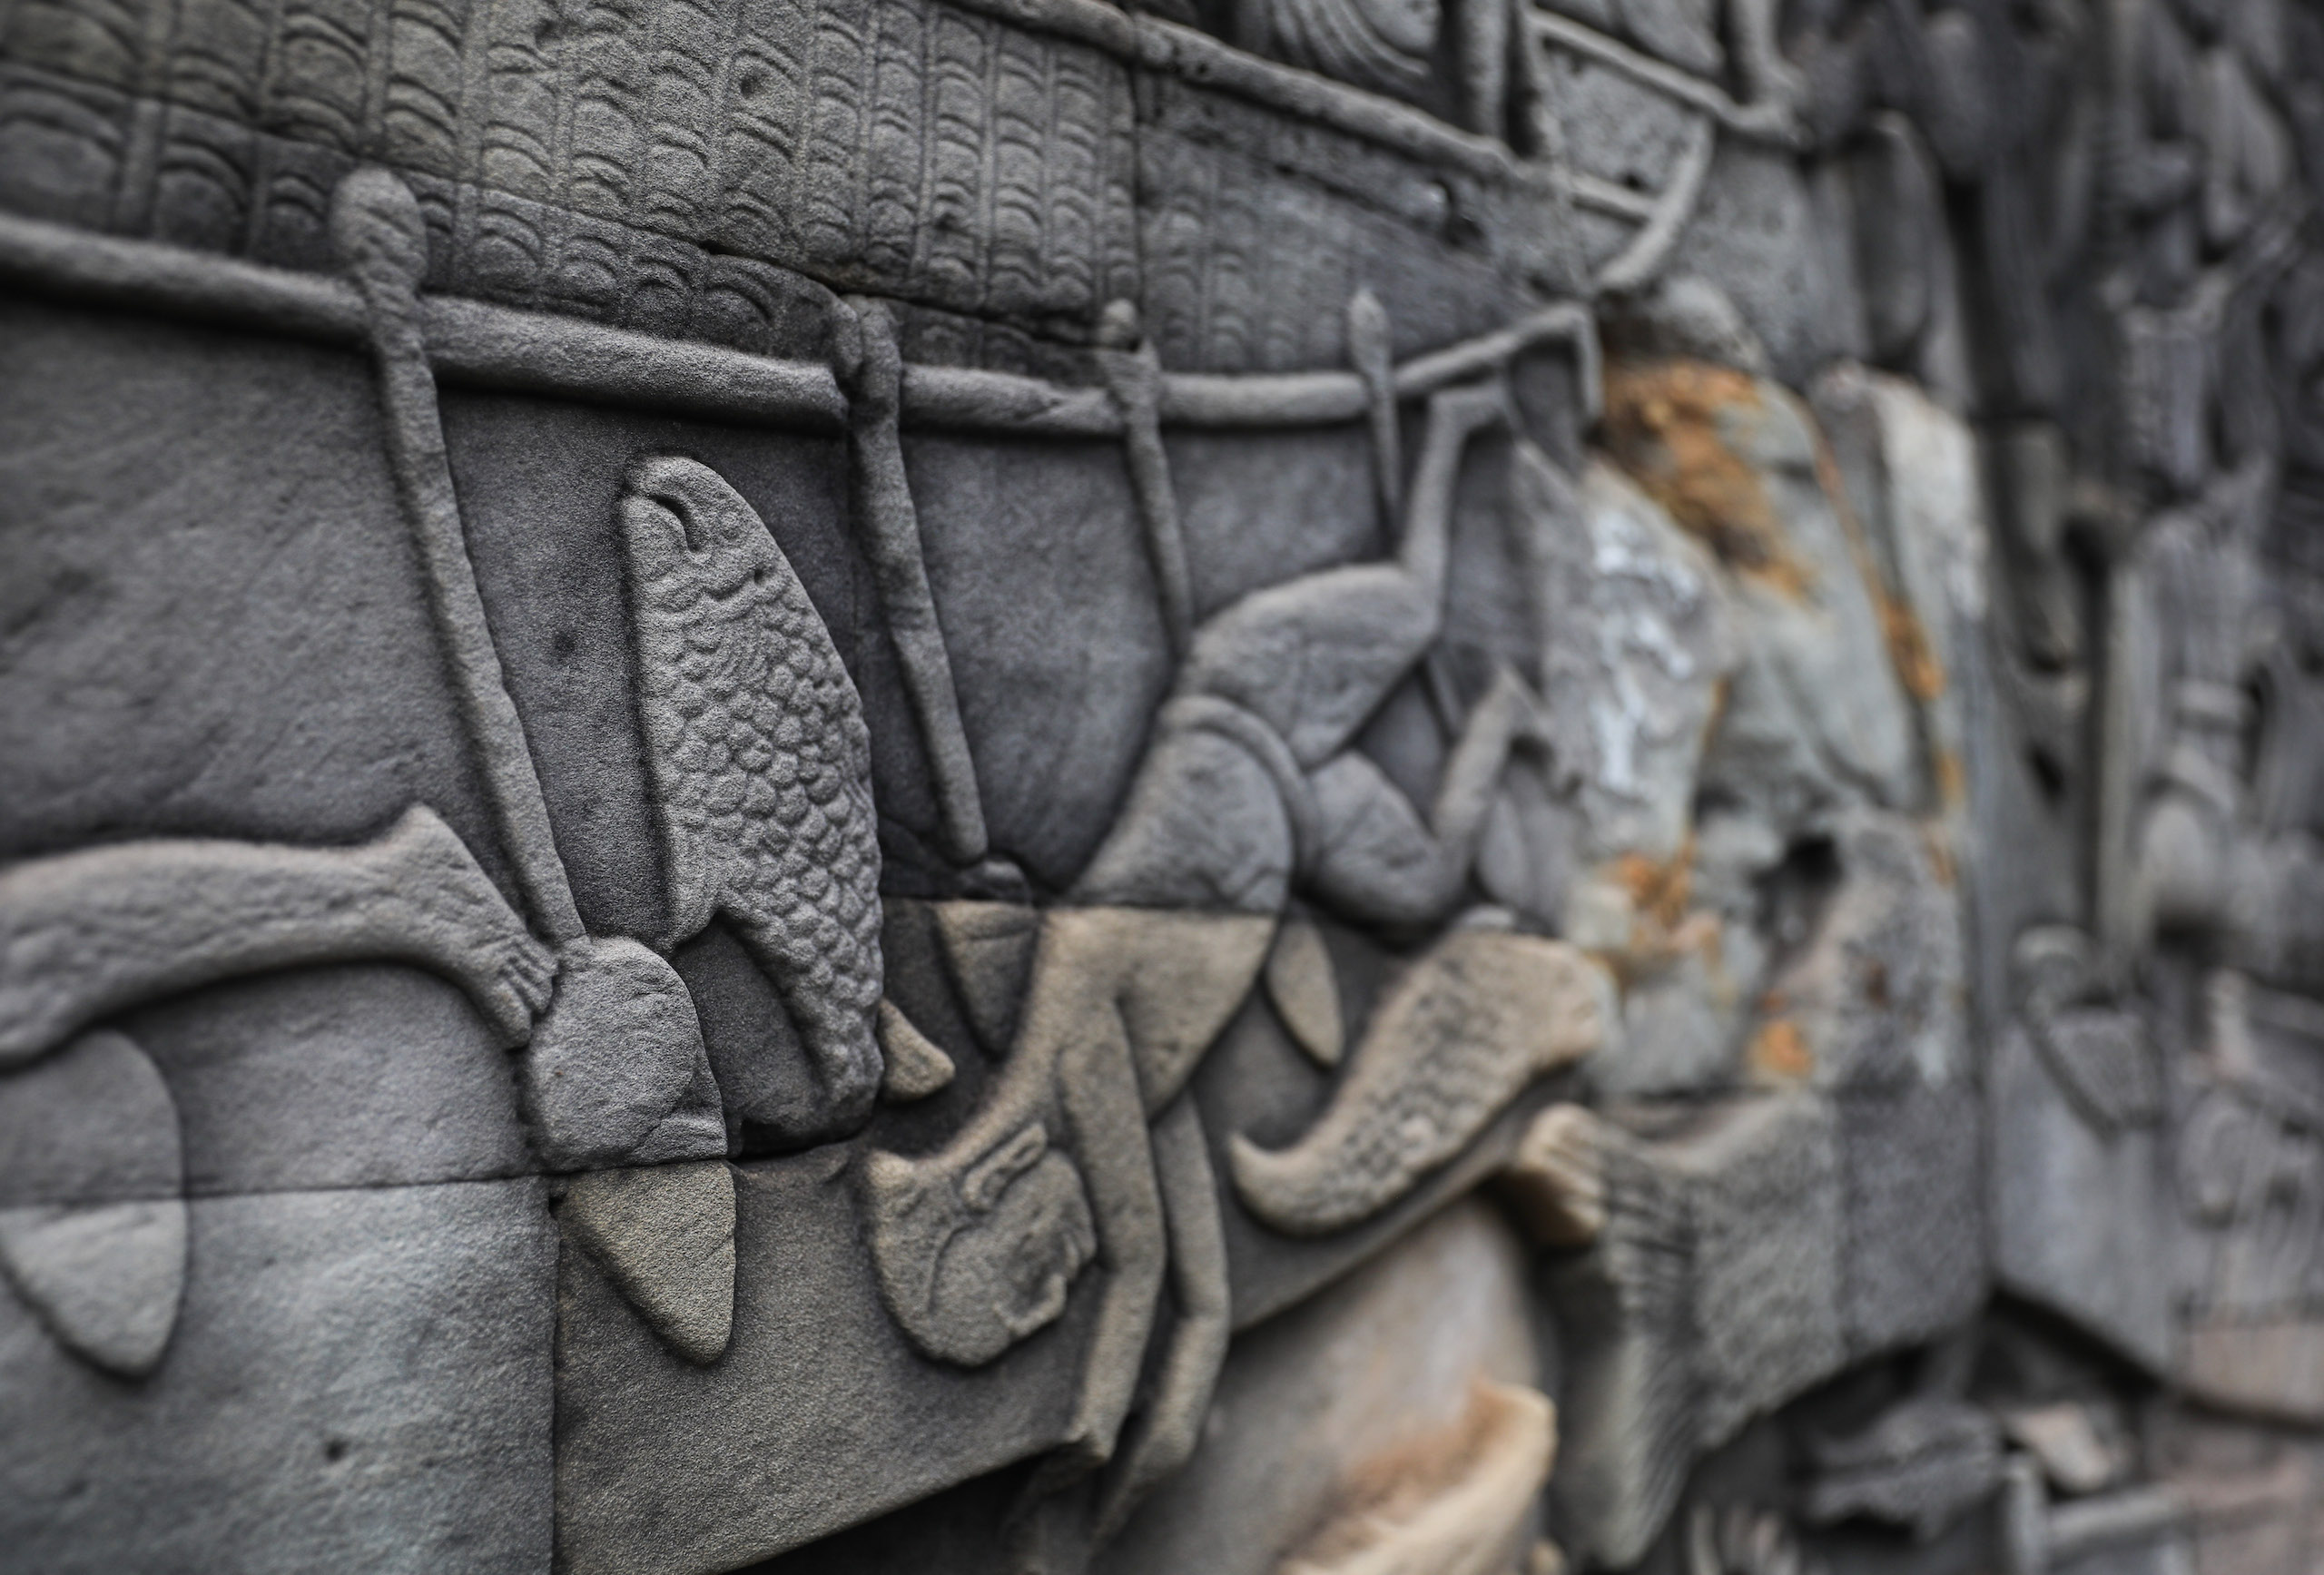 The walls of Bayon Temple in Cambodia’s Angkor Archeological Park